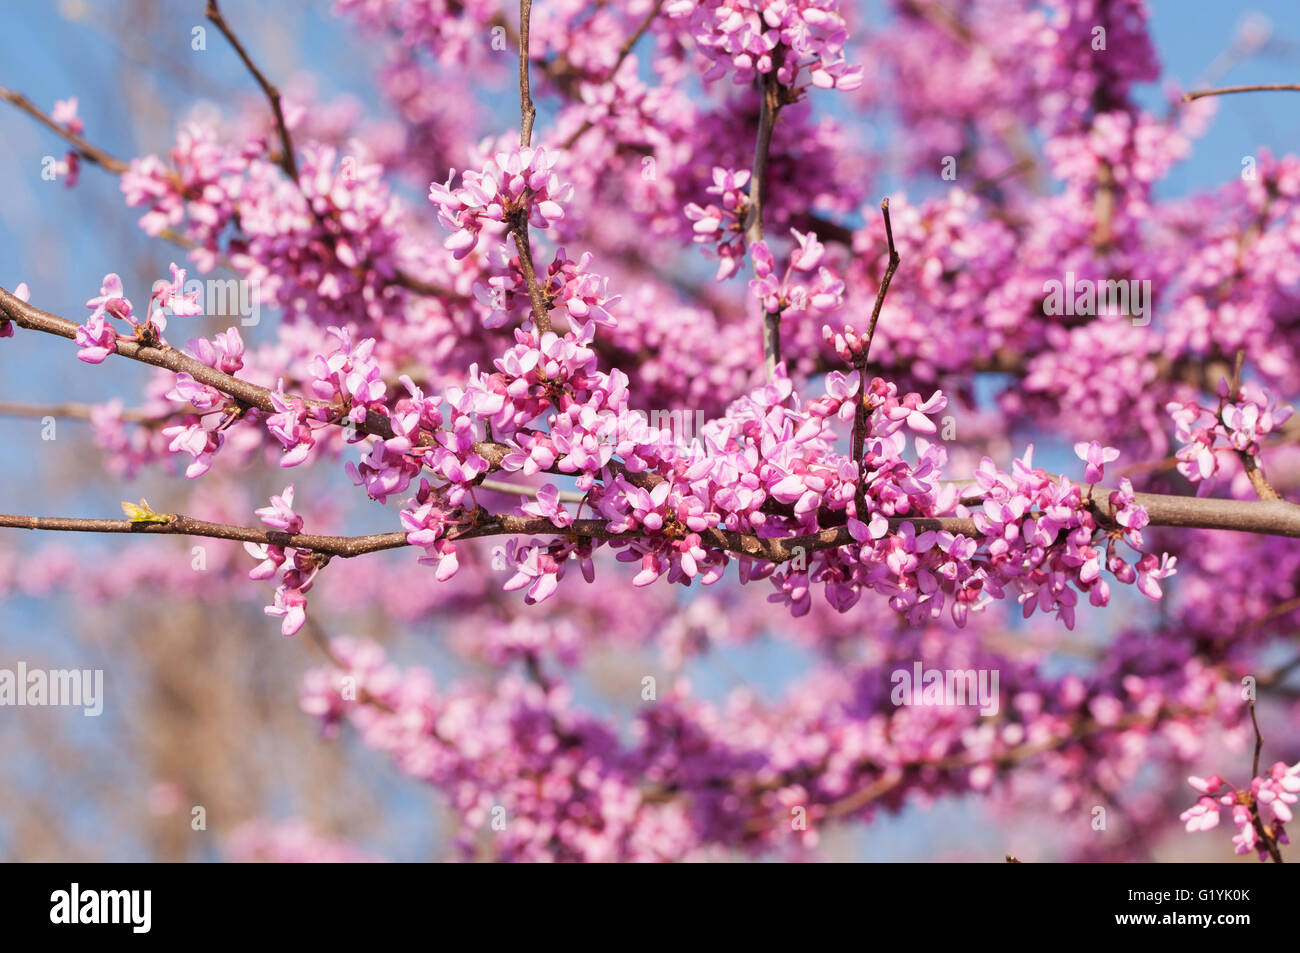 Branches full of pink flower clusters on Eastern Redbud tree in spring Stock Photo